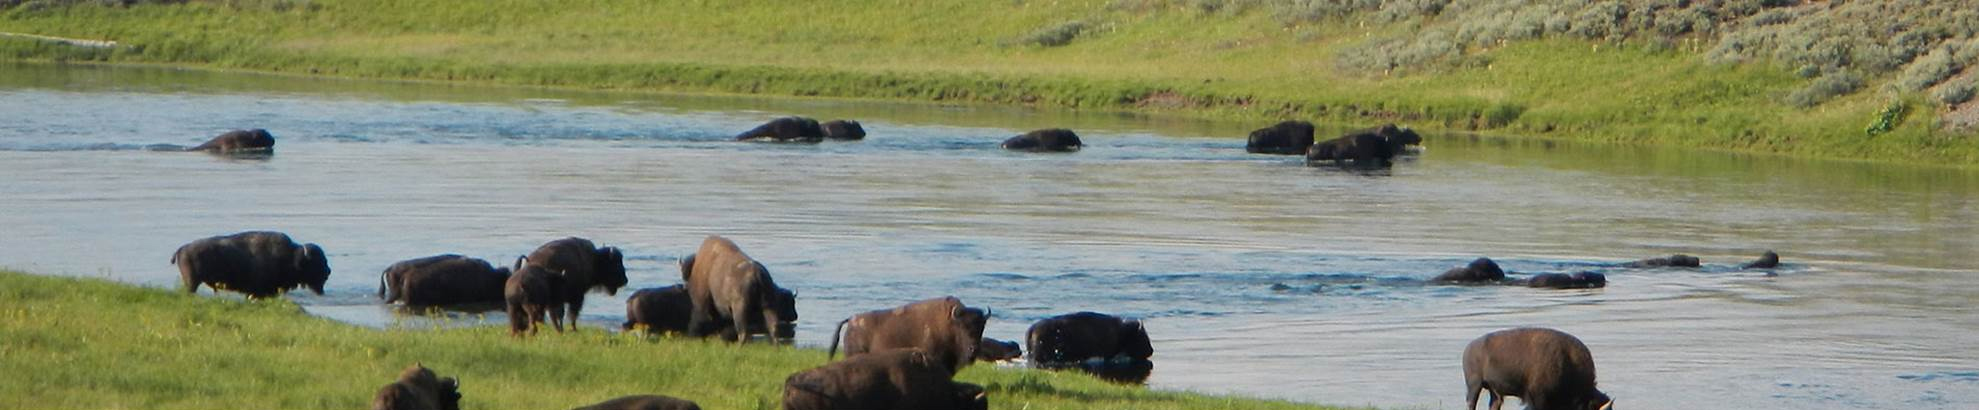 Bison in water